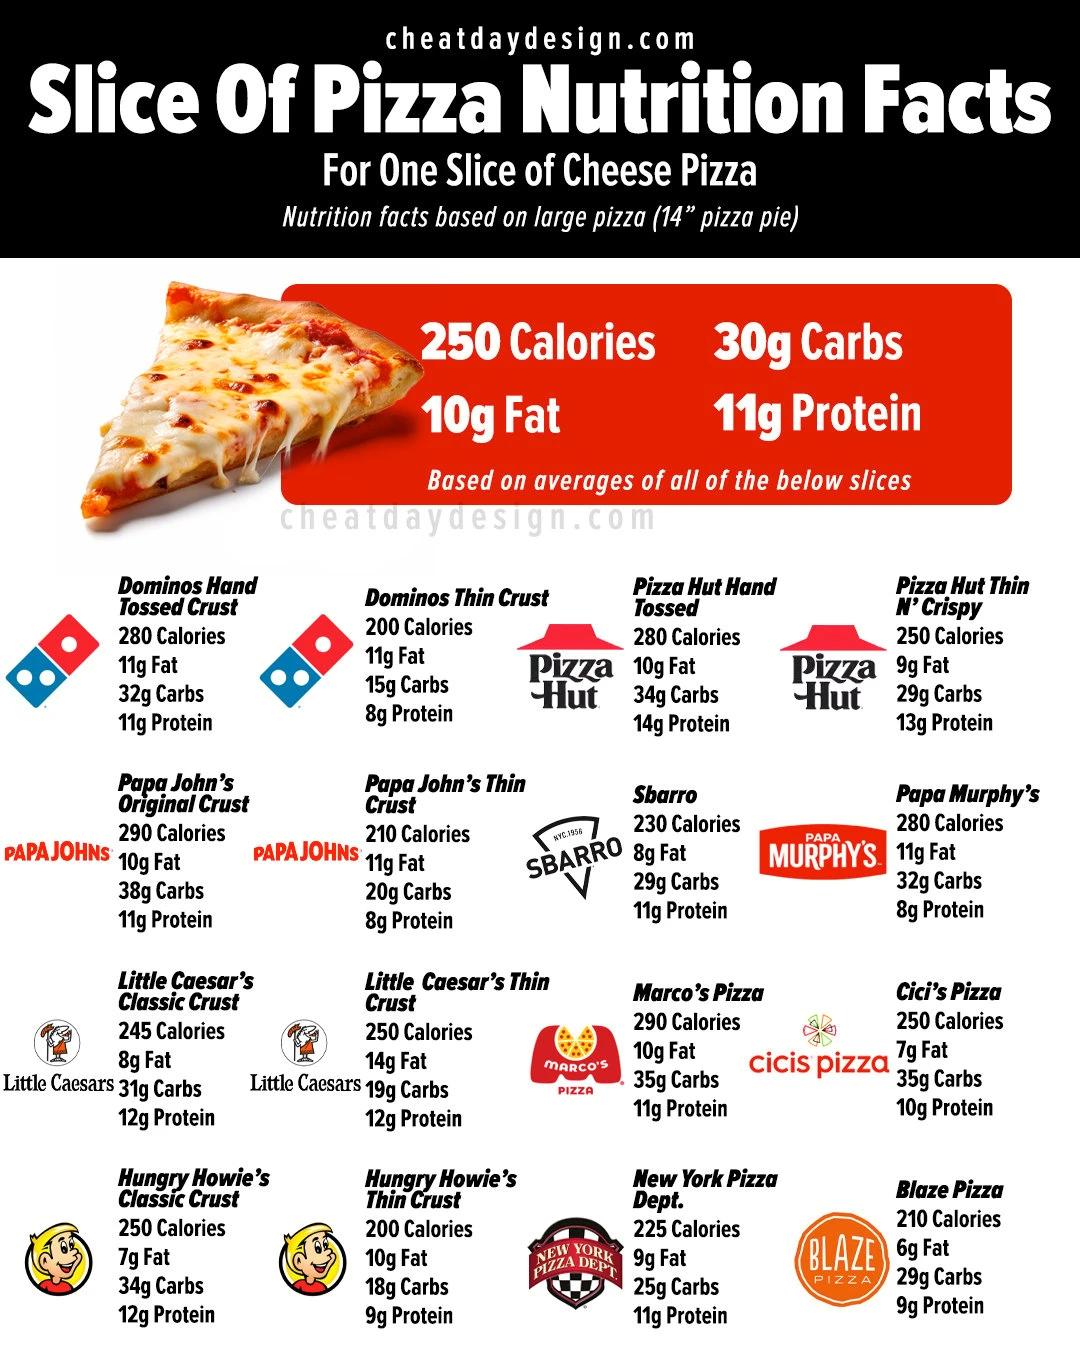 calories in a slice of pizza - Is 4 slices of pizza too much